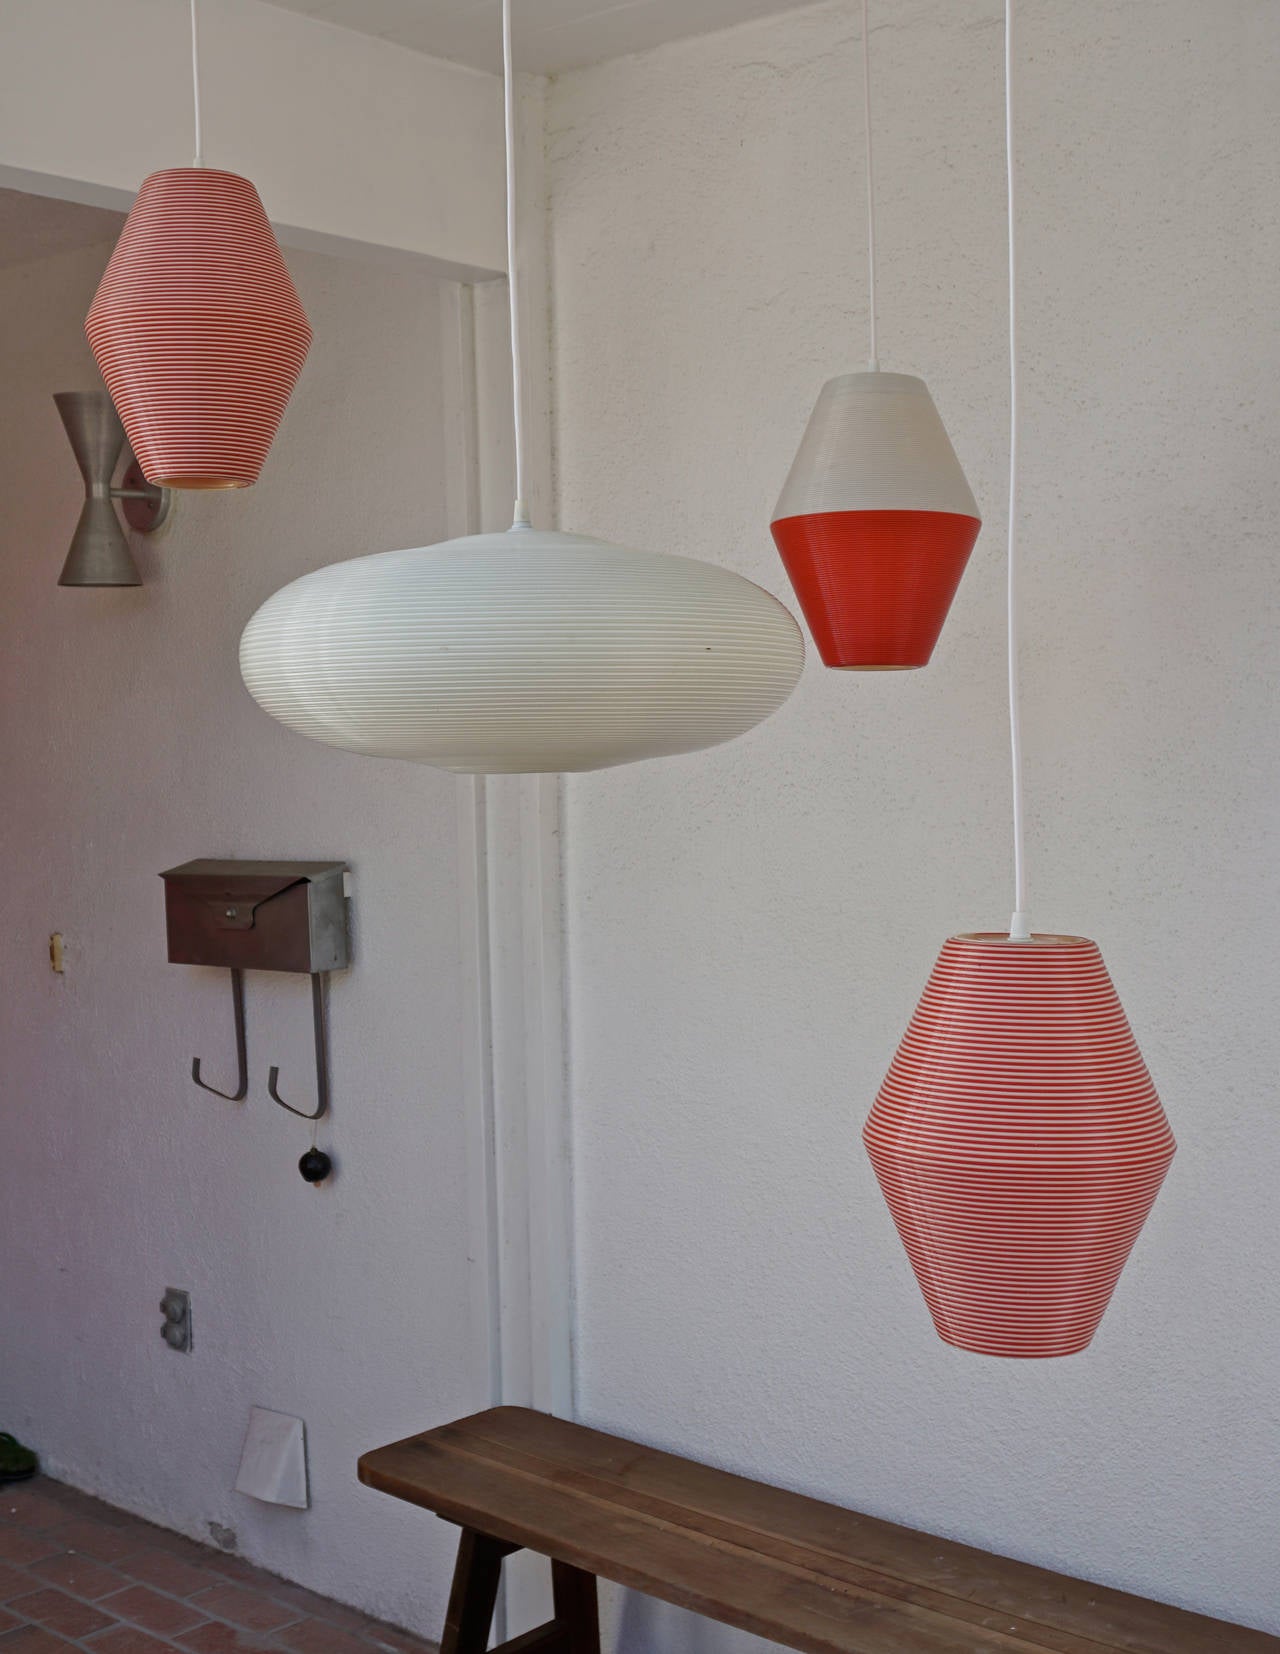 Ribbed plastic hanging lamps distributed in the US by Heifetz, imported from France. Designed by ARP (Atelier de Recherches Plastiques).
Pair of red and white striped lamps measure 12